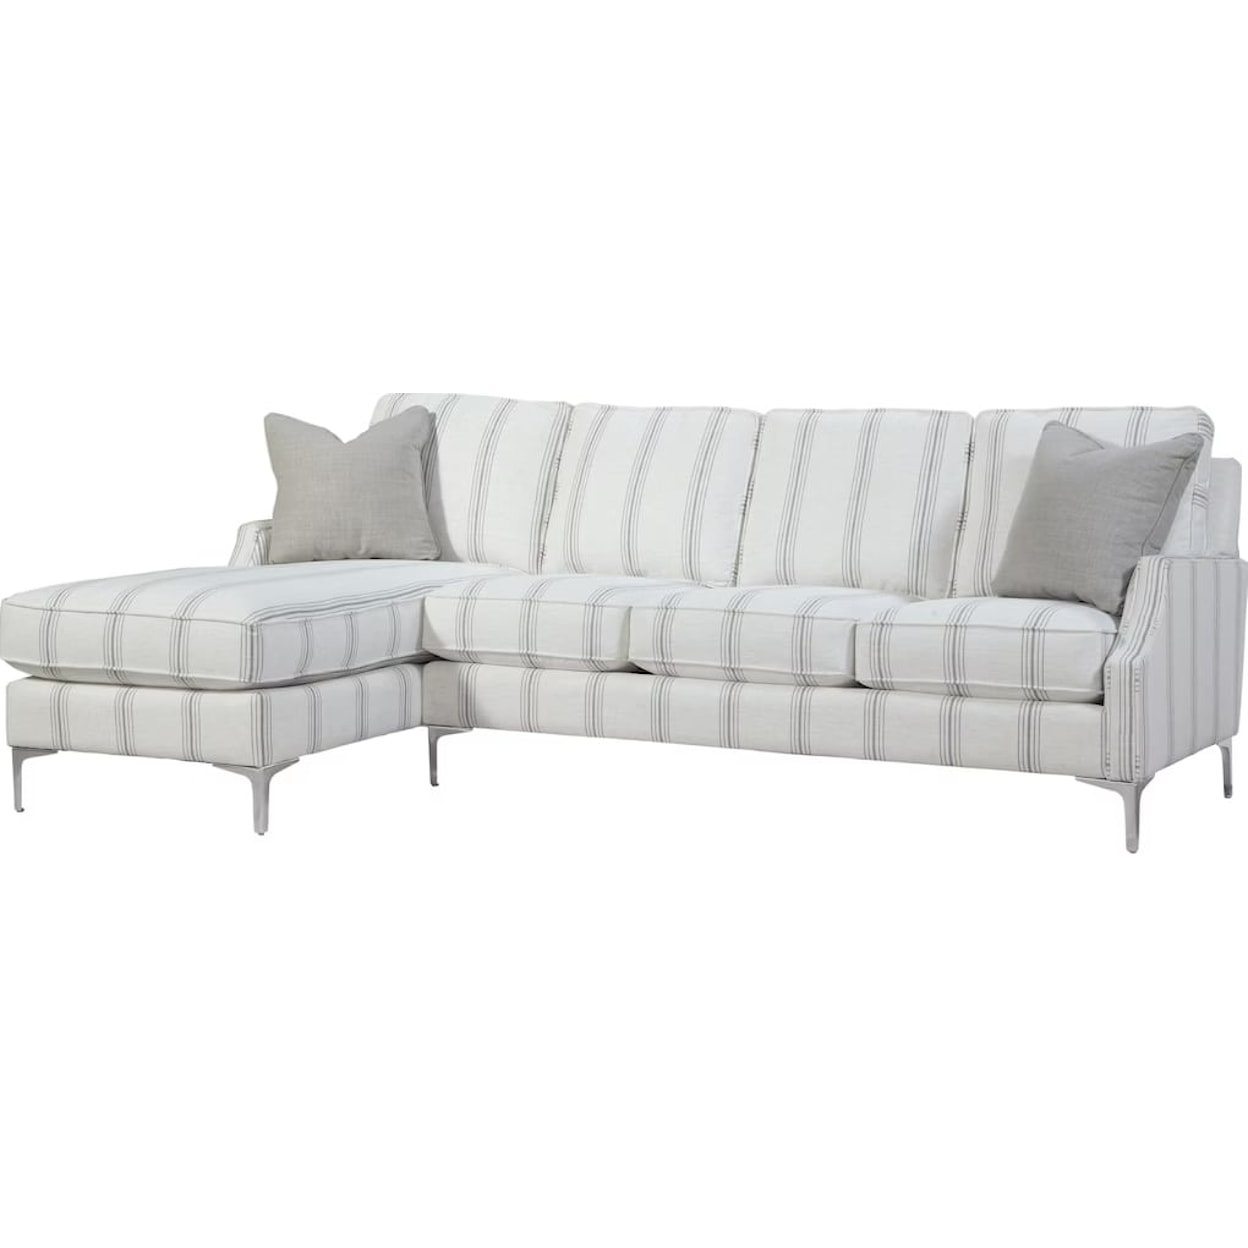 Braxton Culler Urban Options Chaise Sectional